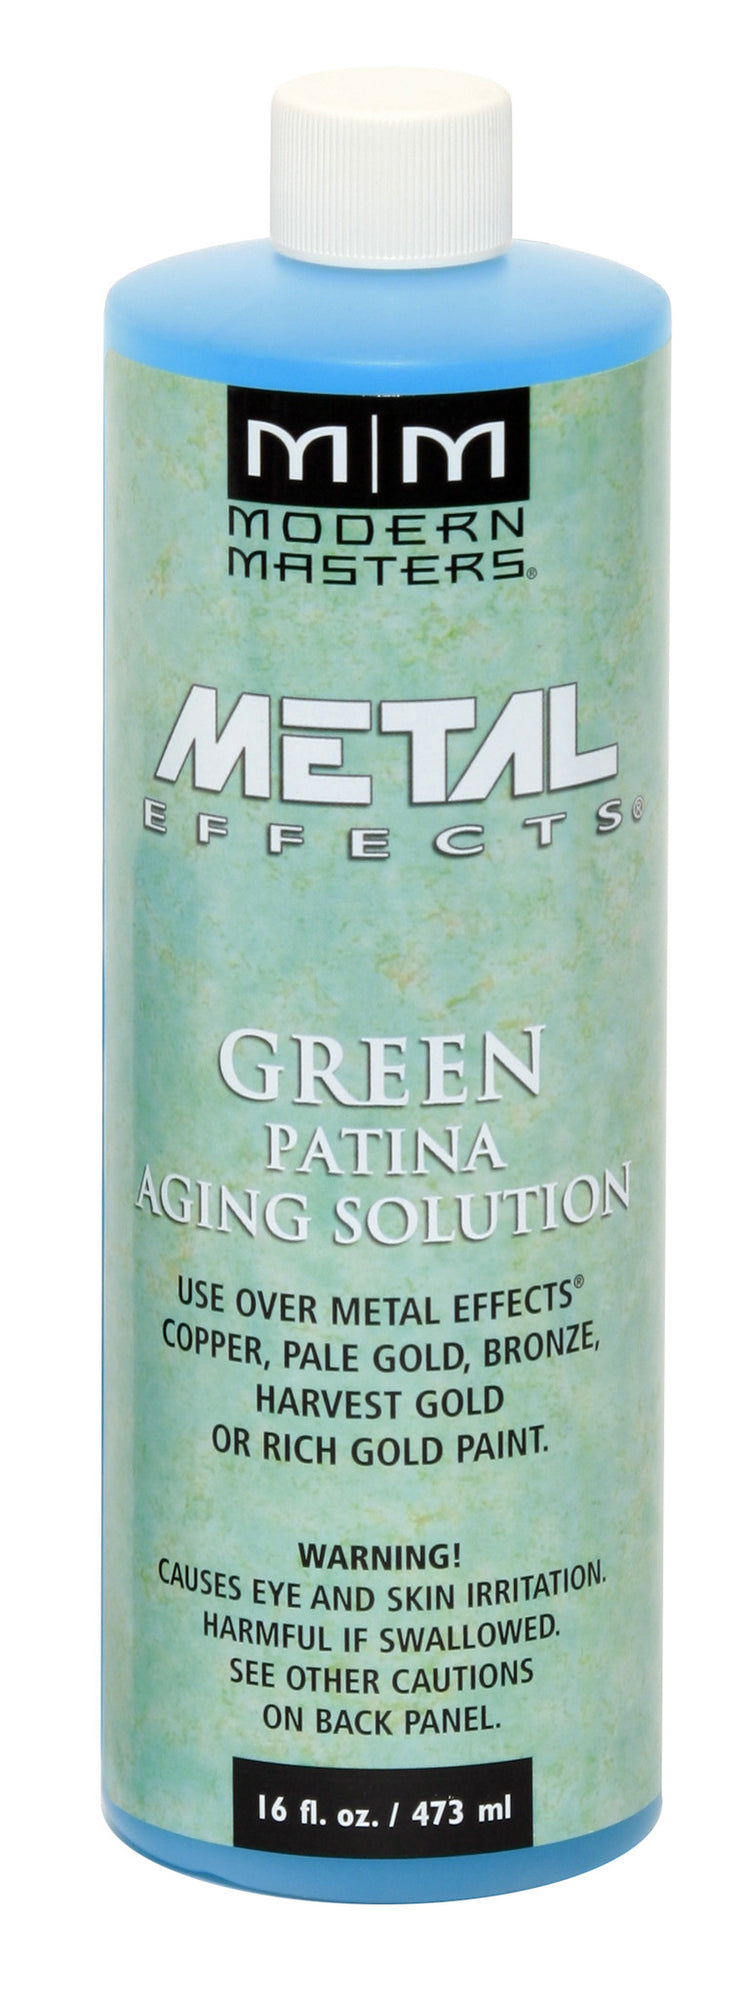 Metal Effects Green Patina Solution - 16 ounce